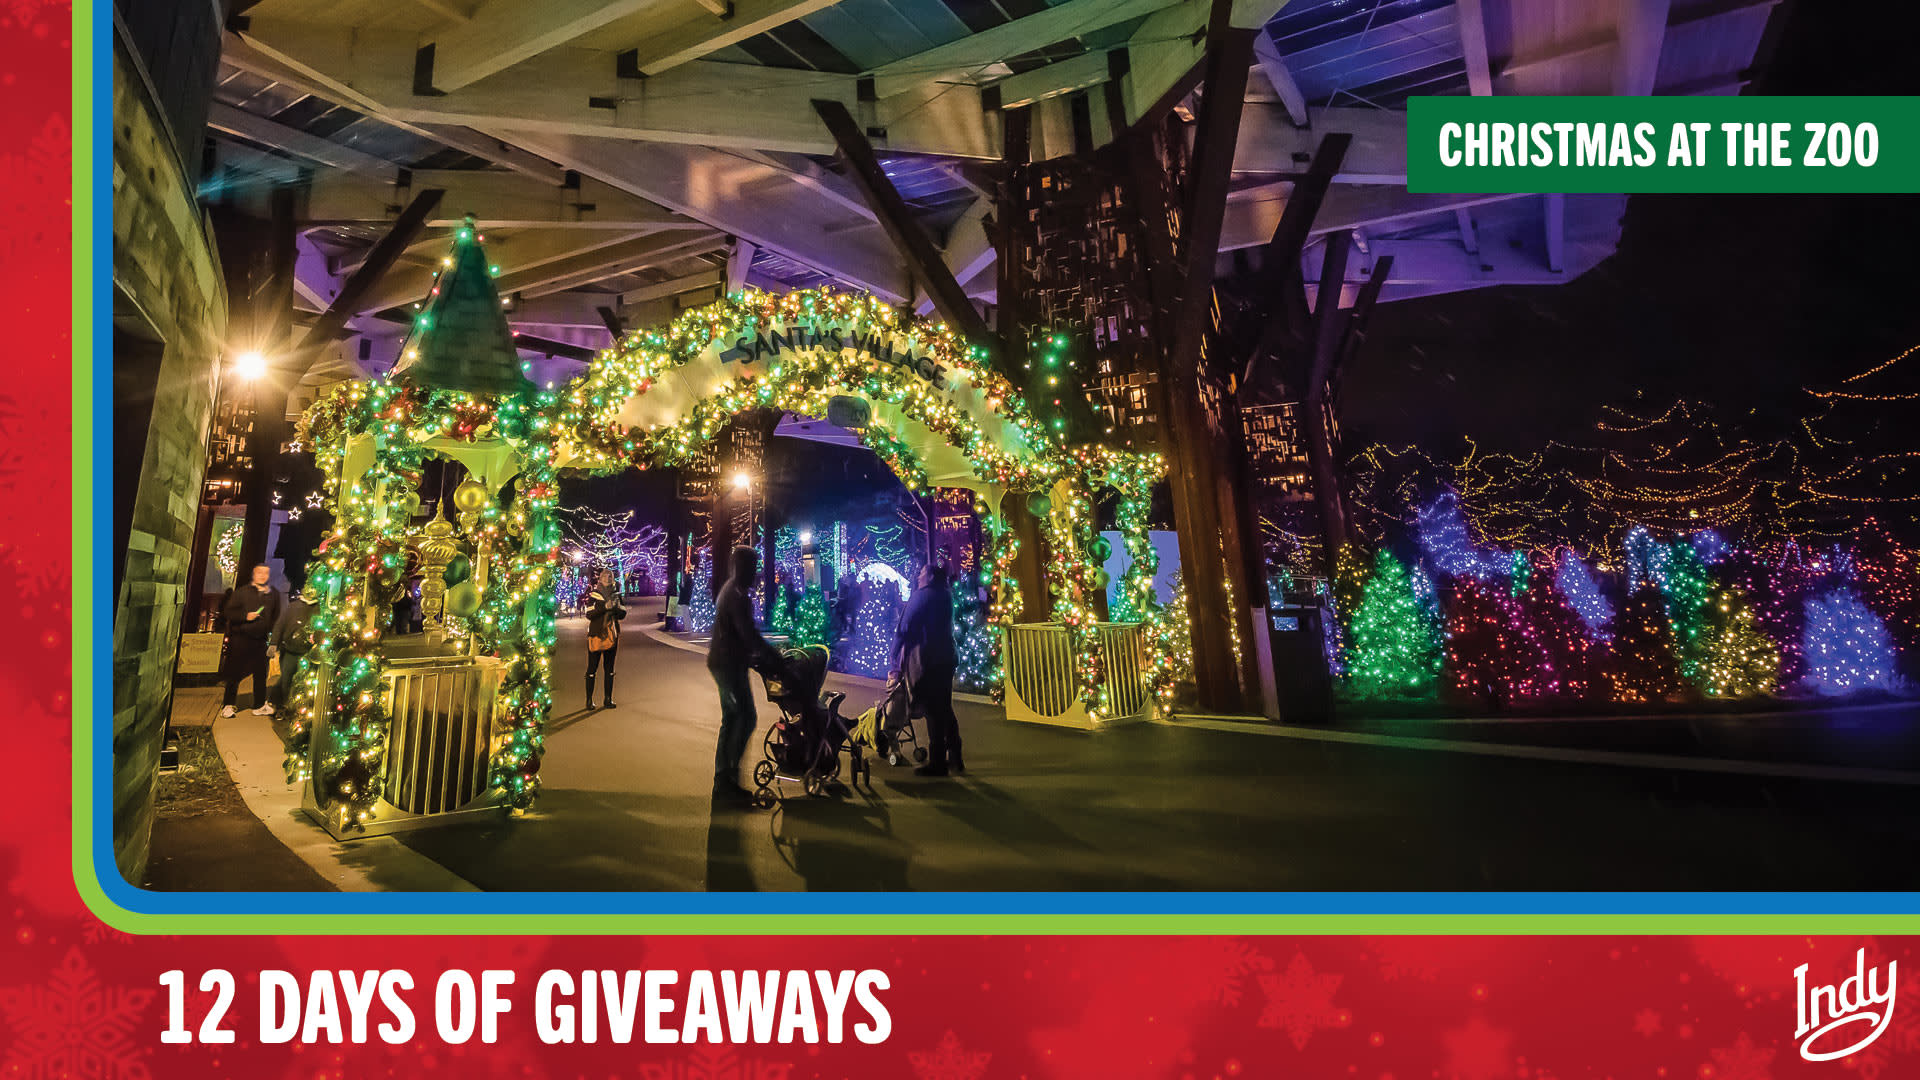 Christmas at the zoo - 12 days of giveaways 2023